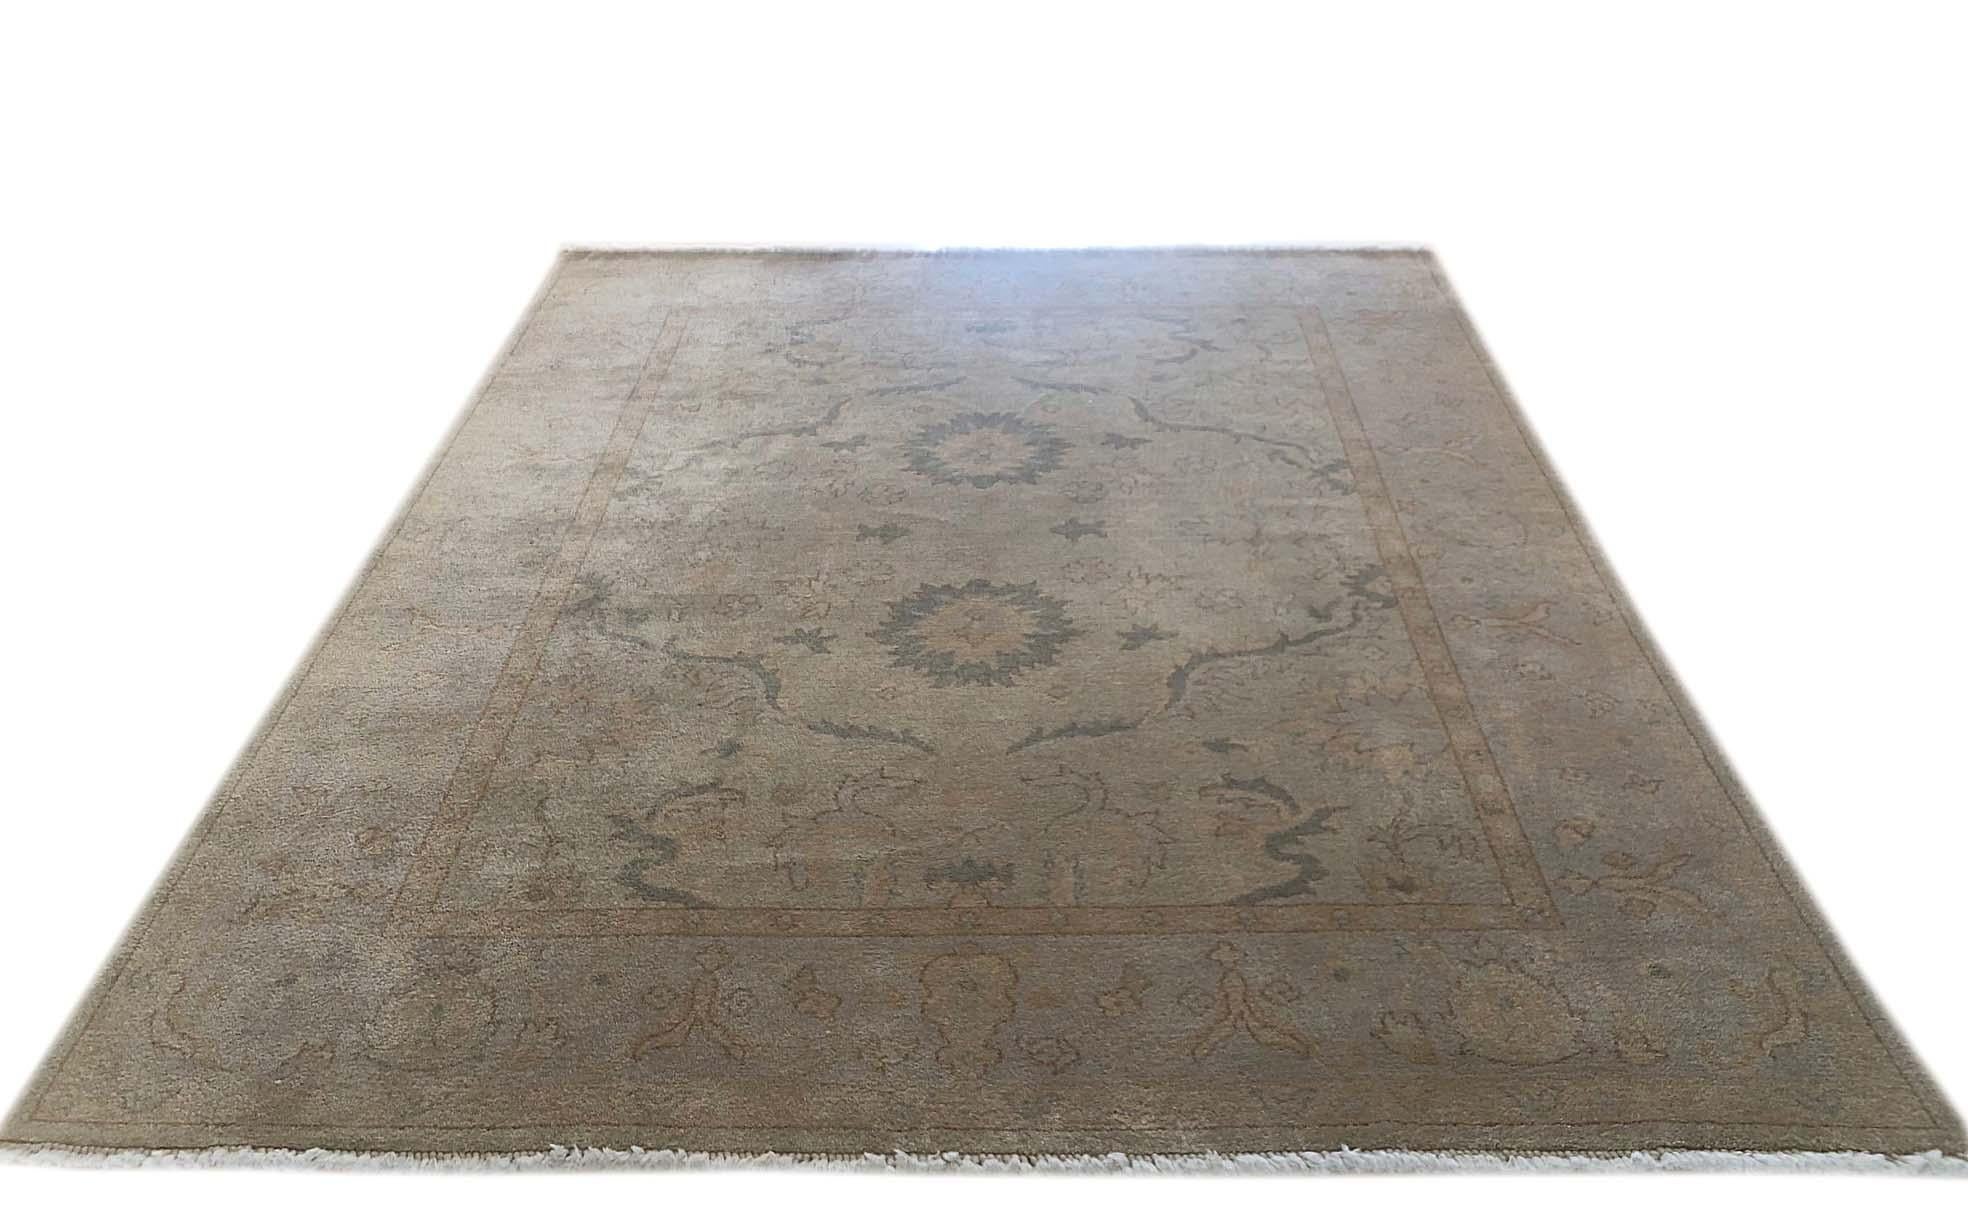 Hand knotted Indian rug with wool pile and cotton foundation. This design of this piece has been inspired by well-known Persian rugs Sultanabad design in the 19th century . The base and border color is ice blue.